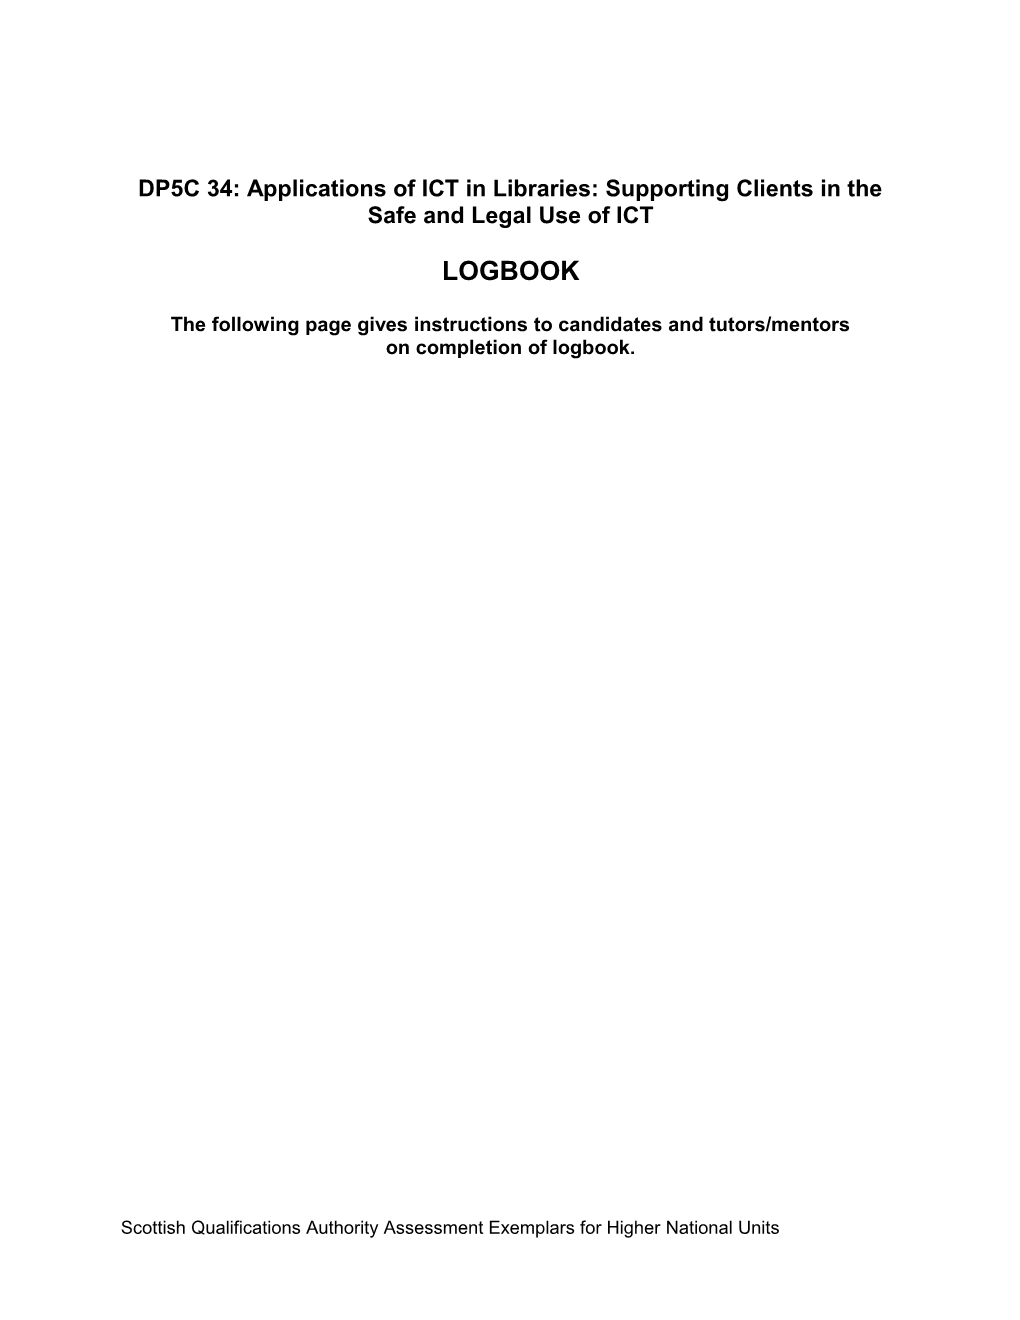 DP5G 34 Applications of ICT in Libraries: Supporting Clients in the Safe and Legal Use of ICT